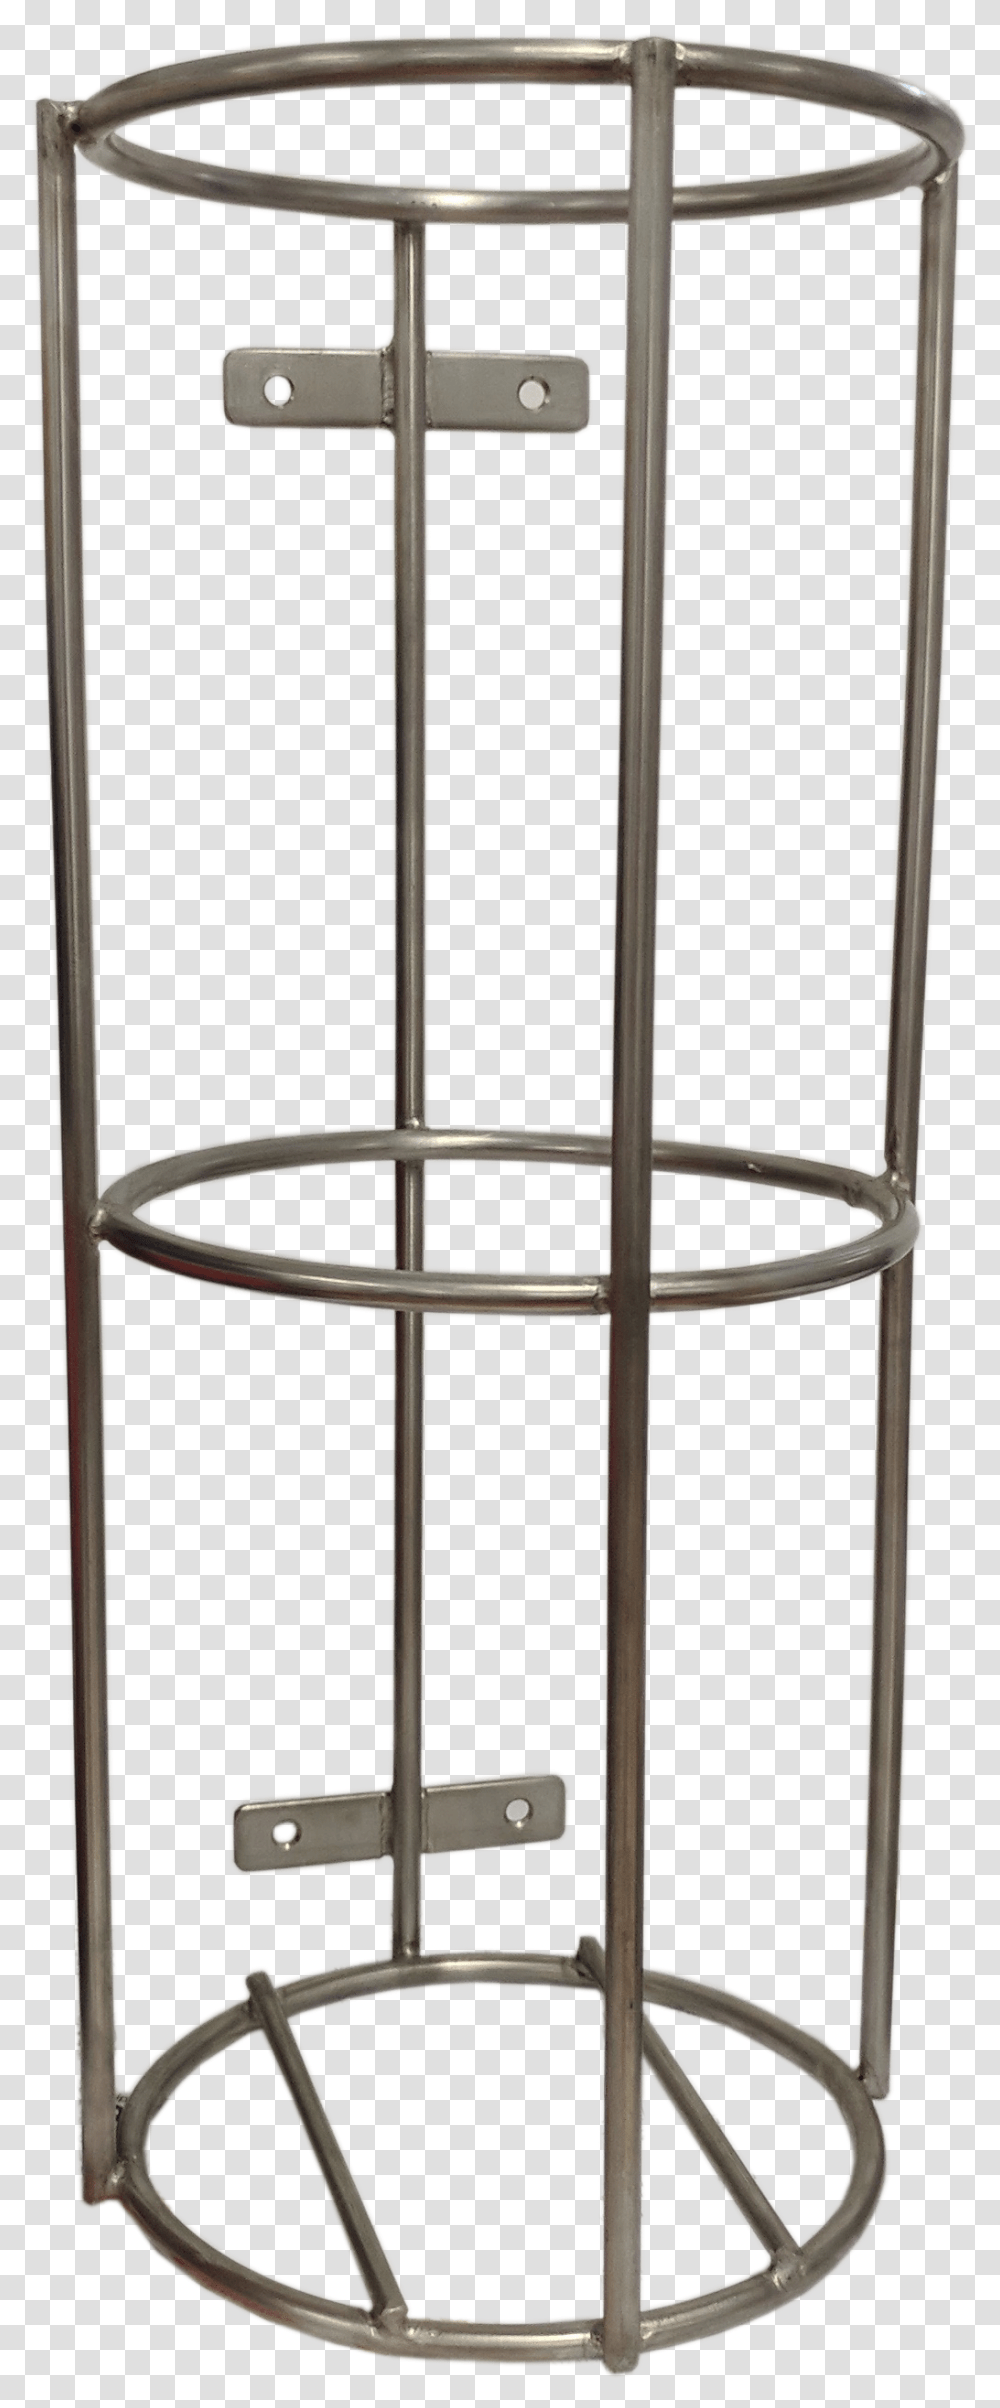 Stainless Steel C Shelf, Furniture, Bar Stool, Shower Faucet, Table Transparent Png